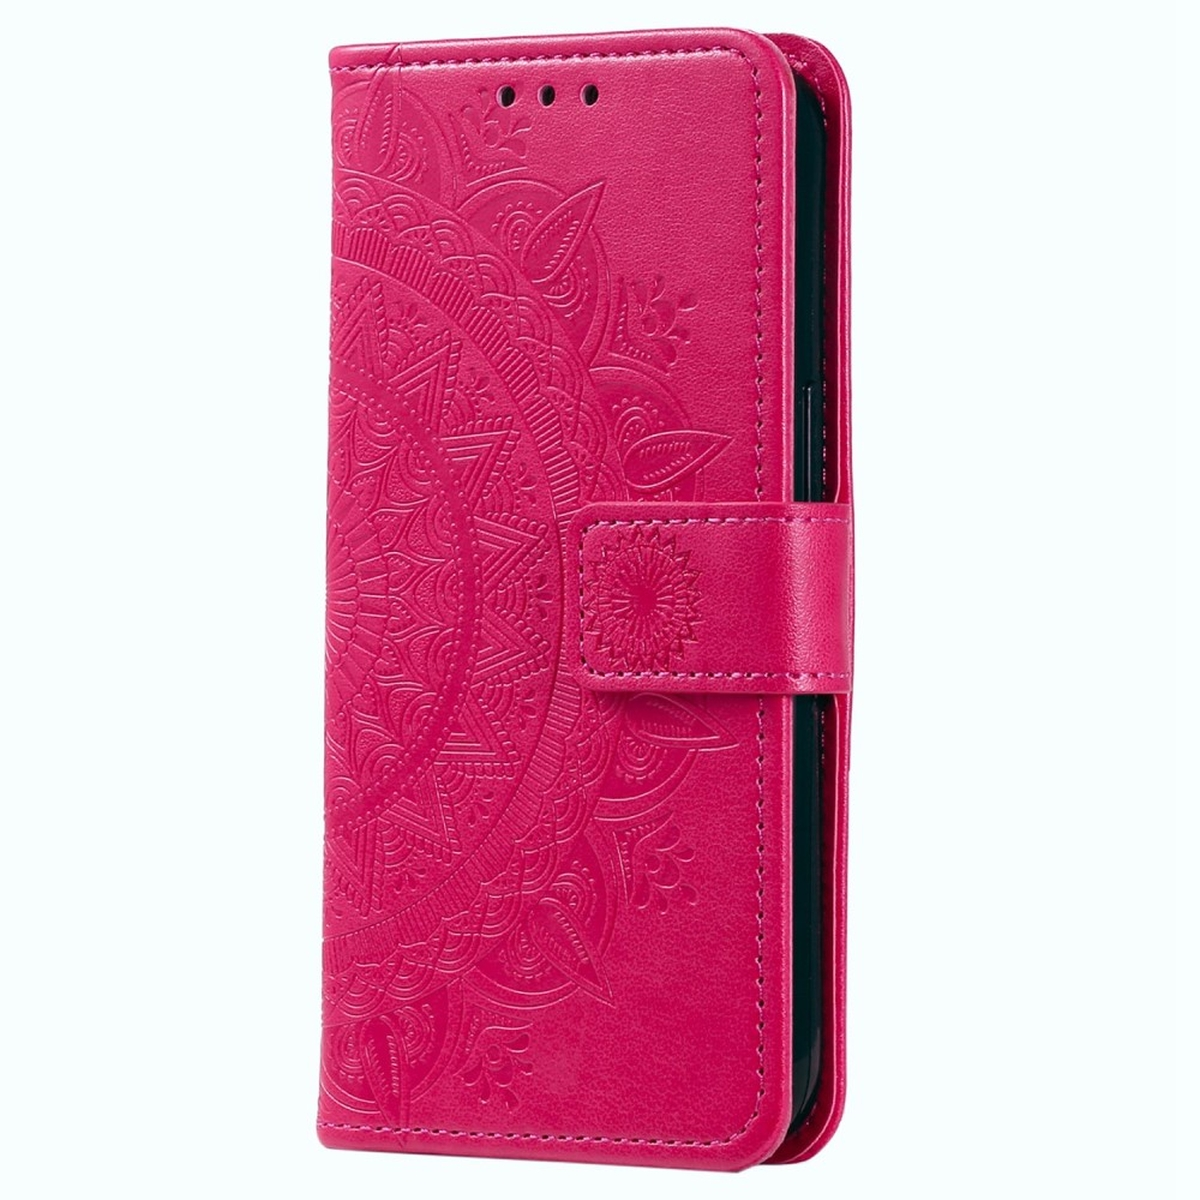 Muster, Mandala S23, Bookcover, Klapphülle COVERKINGZ Pink mit Samsung, Galaxy